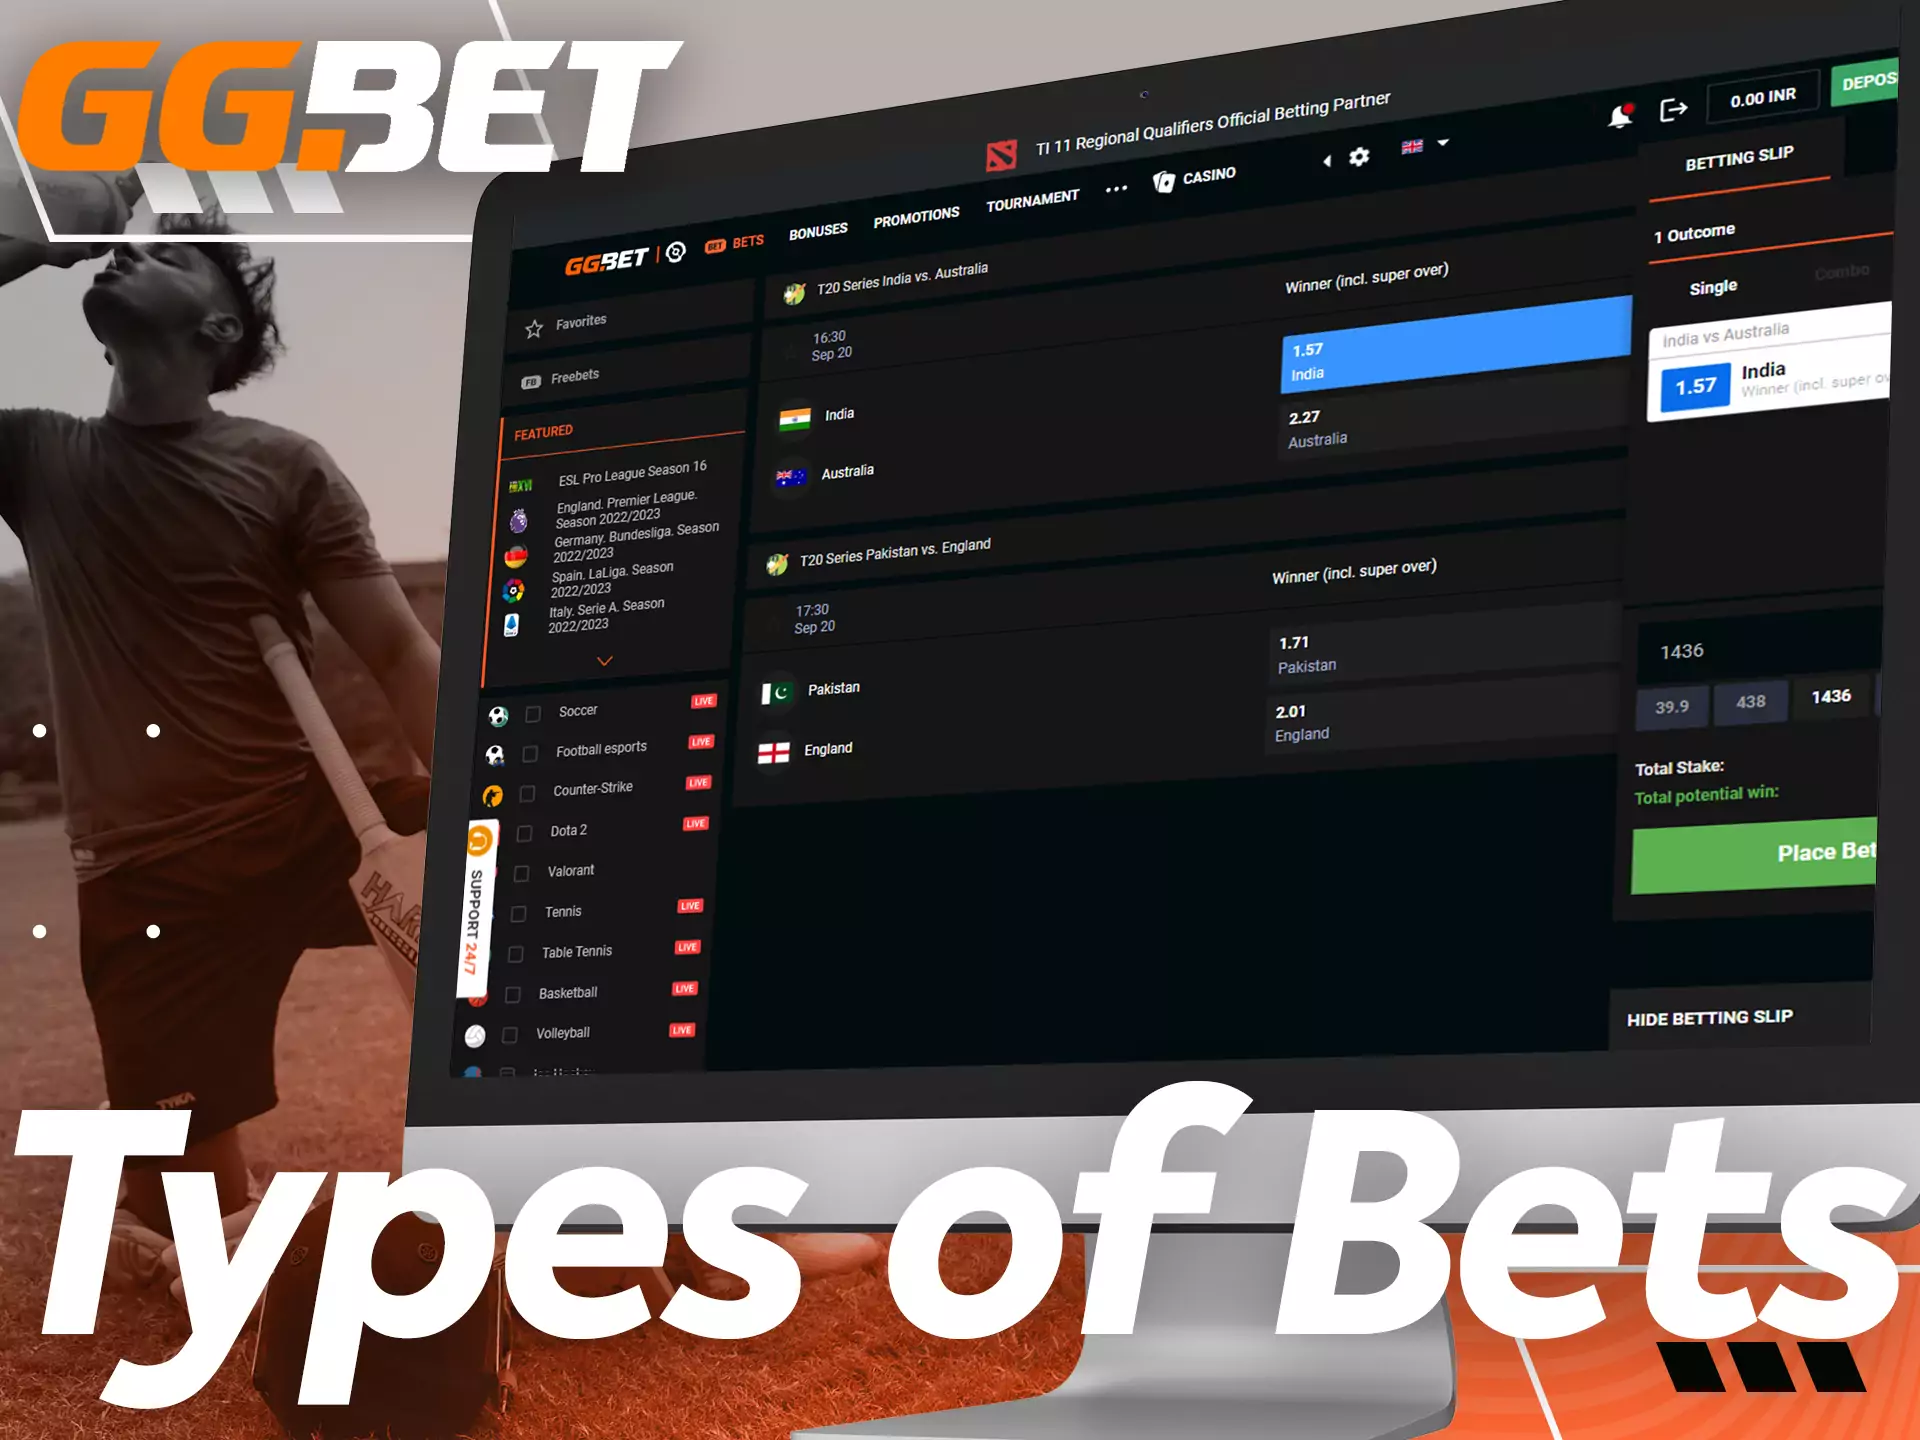 Among the types of bets on GGBet, you find different combinations of bets.